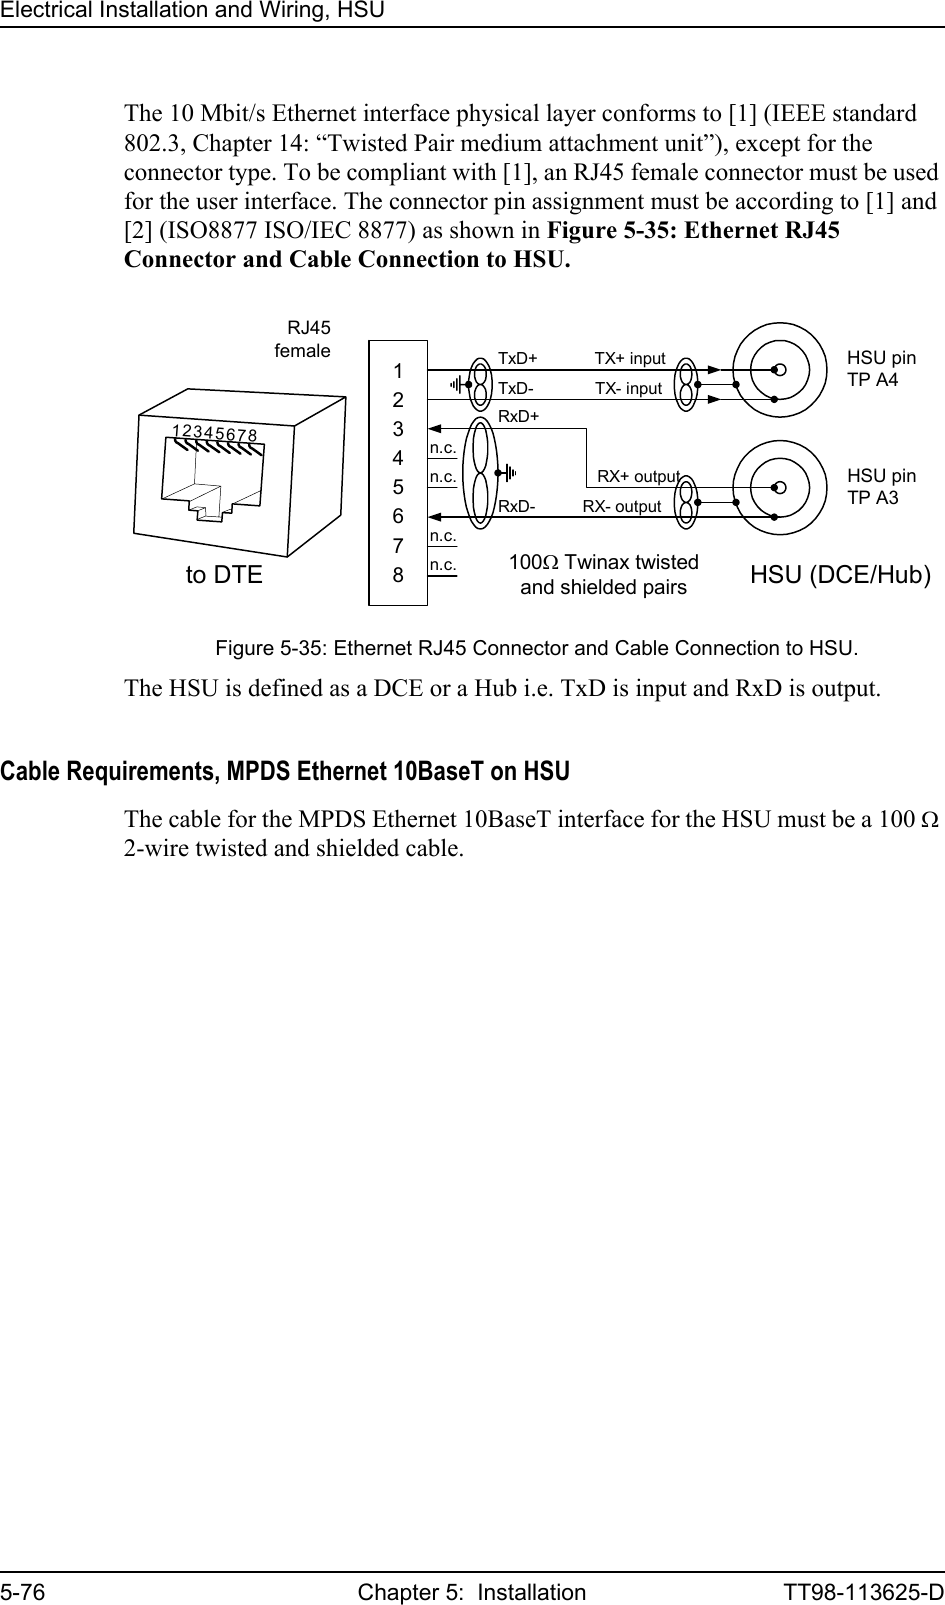 Electrical Installation and Wiring, HSU5-76 Chapter 5:  Installation TT98-113625-DThe 10 Mbit/s Ethernet interface physical layer conforms to [1] (IEEE standard 802.3, Chapter 14: “Twisted Pair medium attachment unit”), except for the connector type. To be compliant with [1], an RJ45 female connector must be used for the user interface. The connector pin assignment must be according to [1] and [2] (ISO8877 ISO/IEC 8877) as shown in Figure 5-35: Ethernet RJ45 Connector and Cable Connection to HSU.The HSU is defined as a DCE or a Hub i.e. TxD is input and RxD is output. Cable Requirements, MPDS Ethernet 10BaseT on HSUThe cable for the MPDS Ethernet 10BaseT interface for the HSU must be a 100 Ω 2-wire twisted and shielded cable.Figure 5-35: Ethernet RJ45 Connector and Cable Connection to HSU.12345678TxD+            TX+ inputn.c.TxD-             TX- inputRxD+                     RX+ outputn.c.RxD-          RX- outputn.c.n.c.RJ45female HSU pinTP A4to DTE100Ω Twinax twistedand shielded pairsHSU (DCE/Hub)12345678HSU pinTP A3